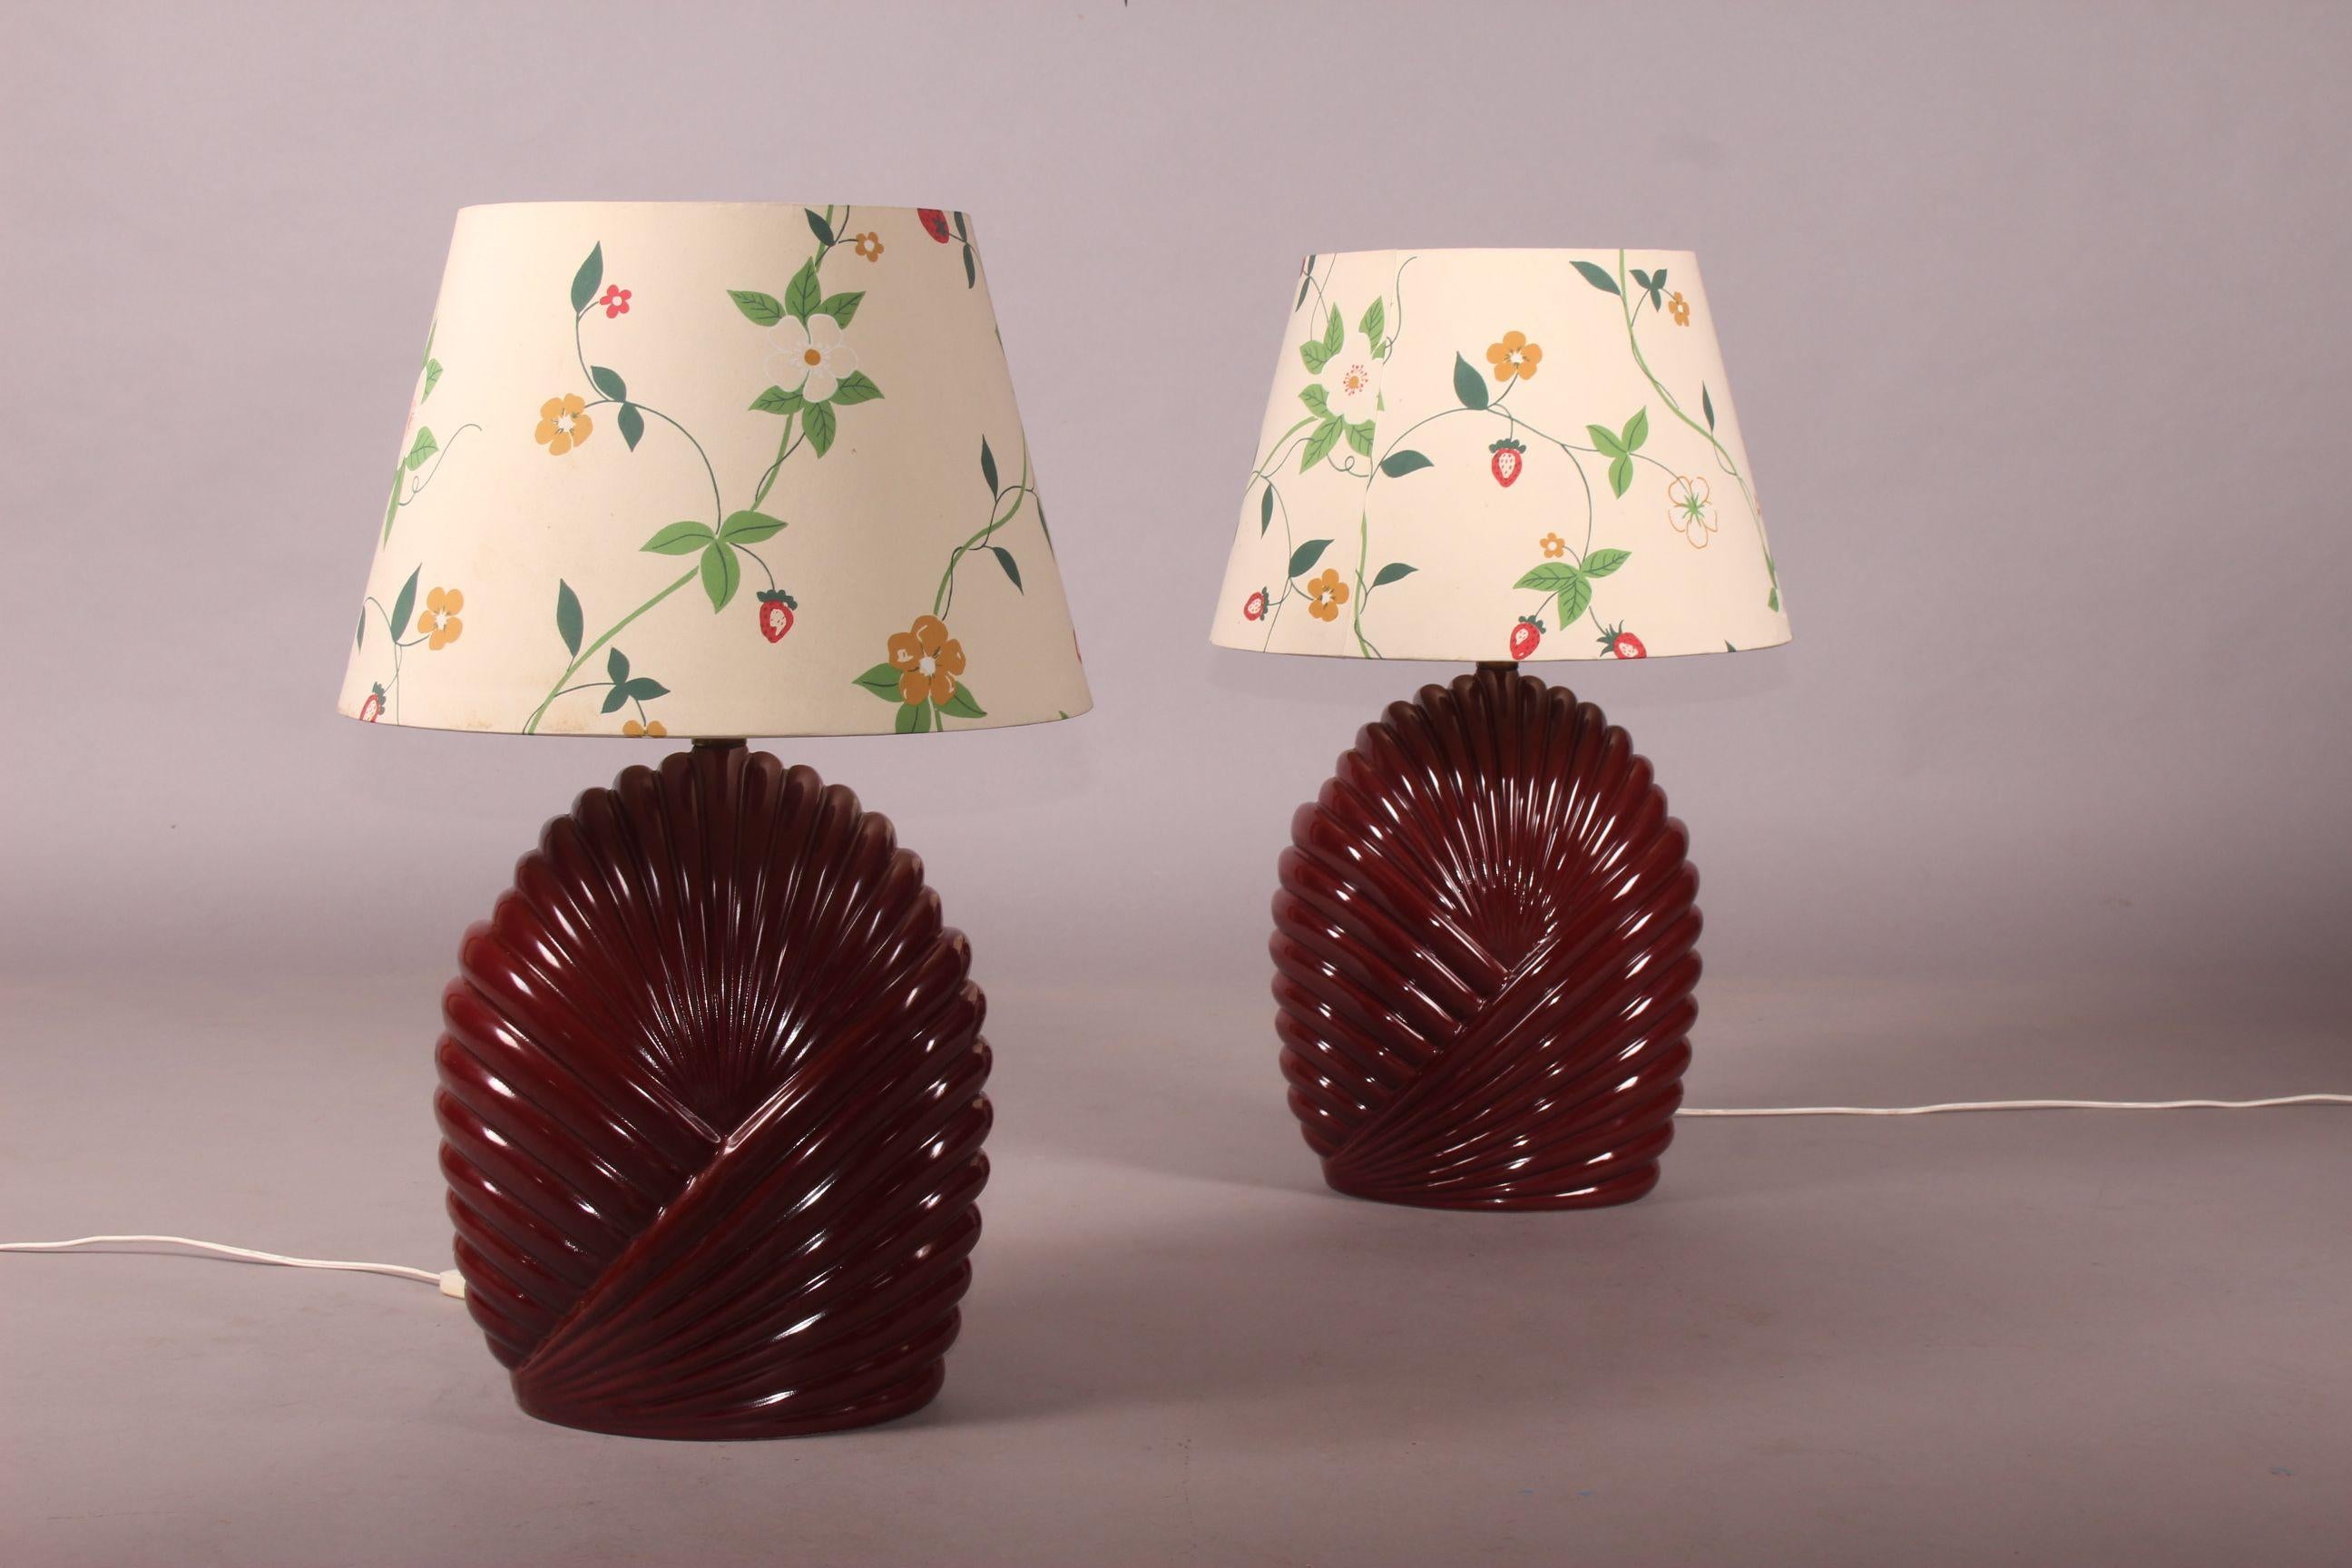 Pair of Arpex ceramic table lamp, dimensions without shade H 50 cm.